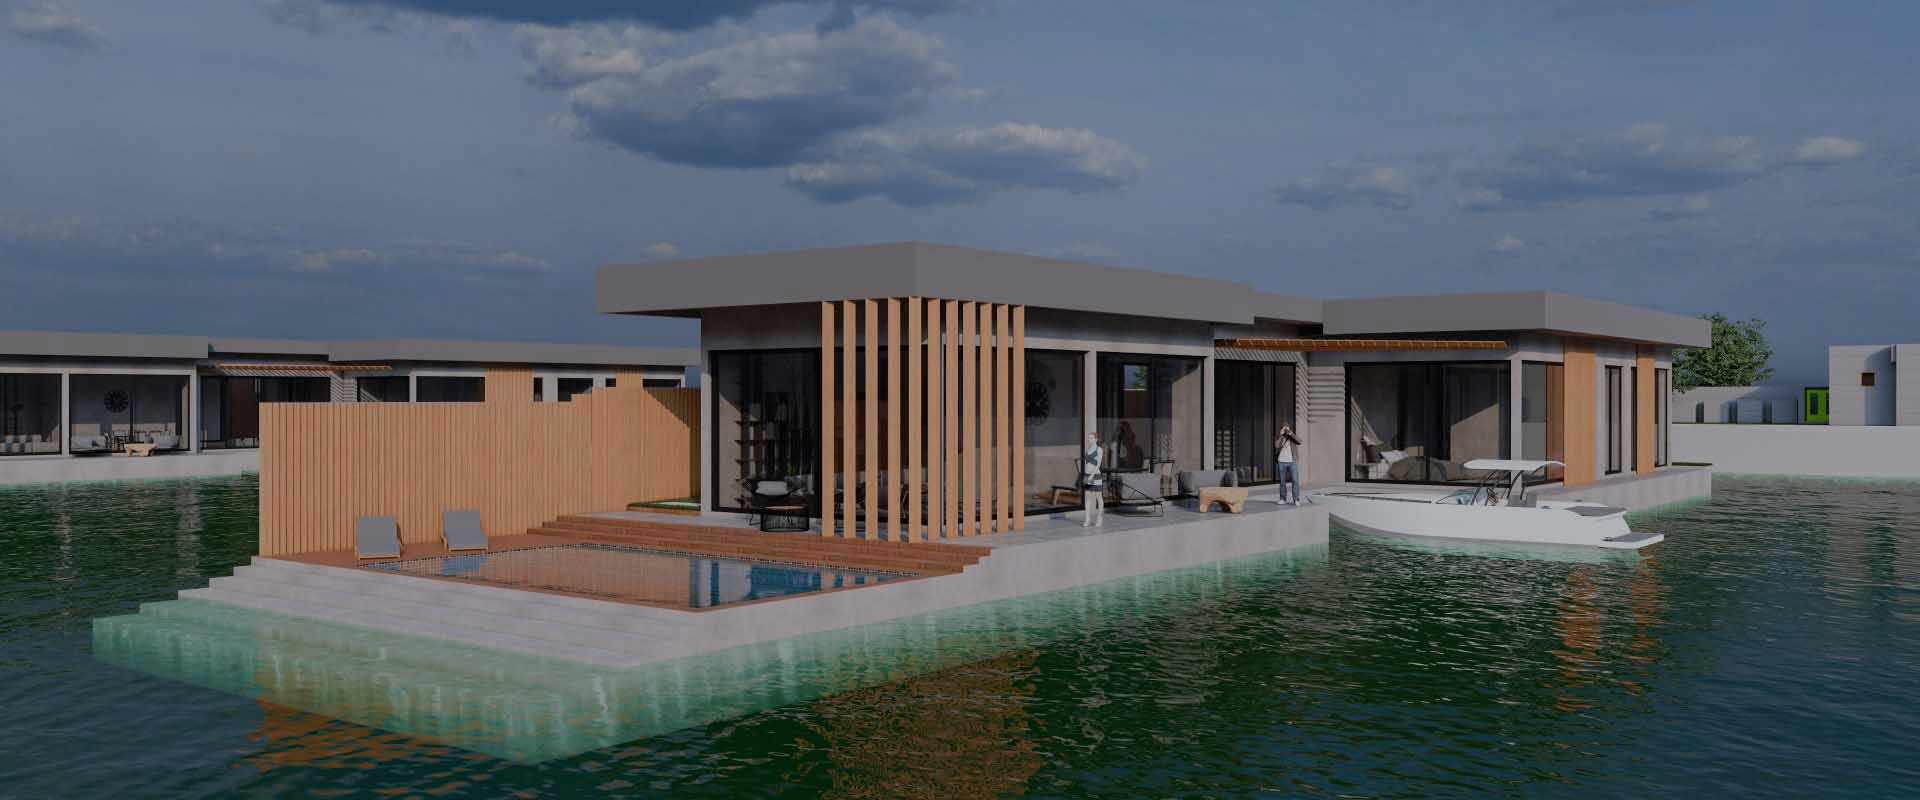 floating-house-villa-on-water-solutions